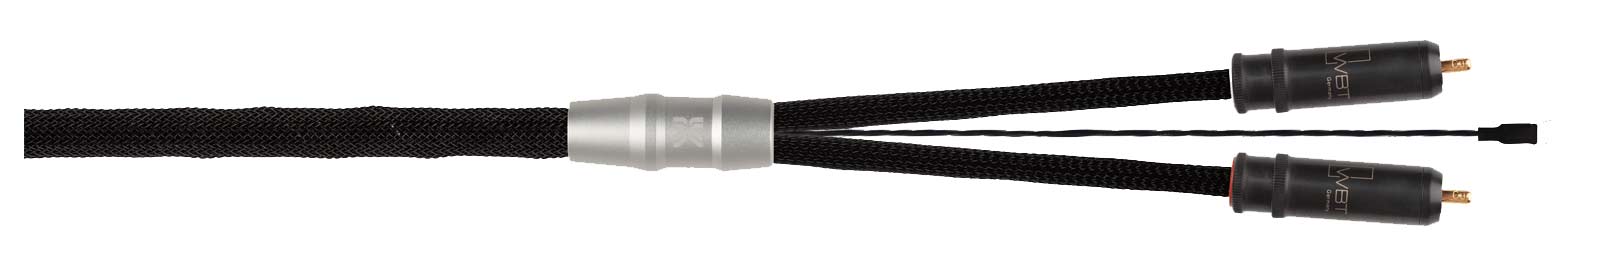 Kimber Carbon Phono cable